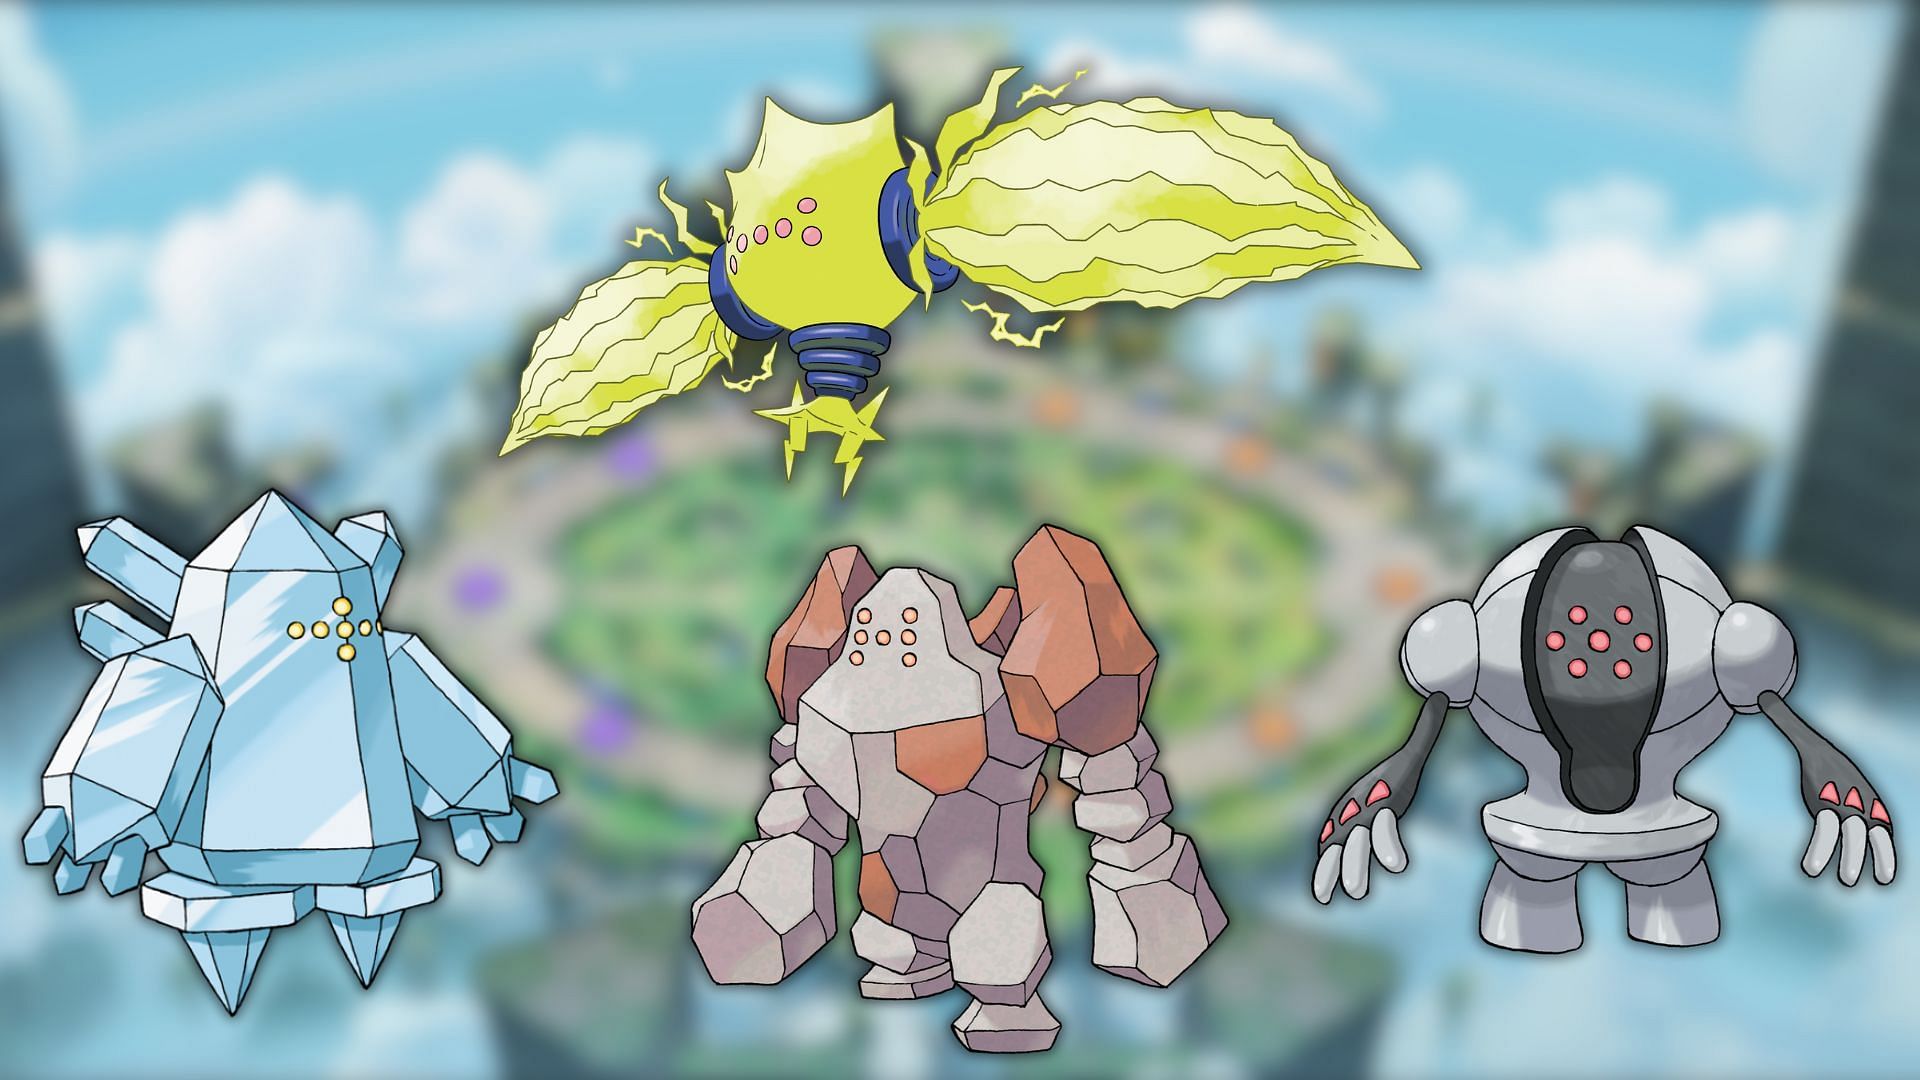 The legendary giants are the most important objectives in the Early to late Mid-game period (Image via The Pokemon Company)